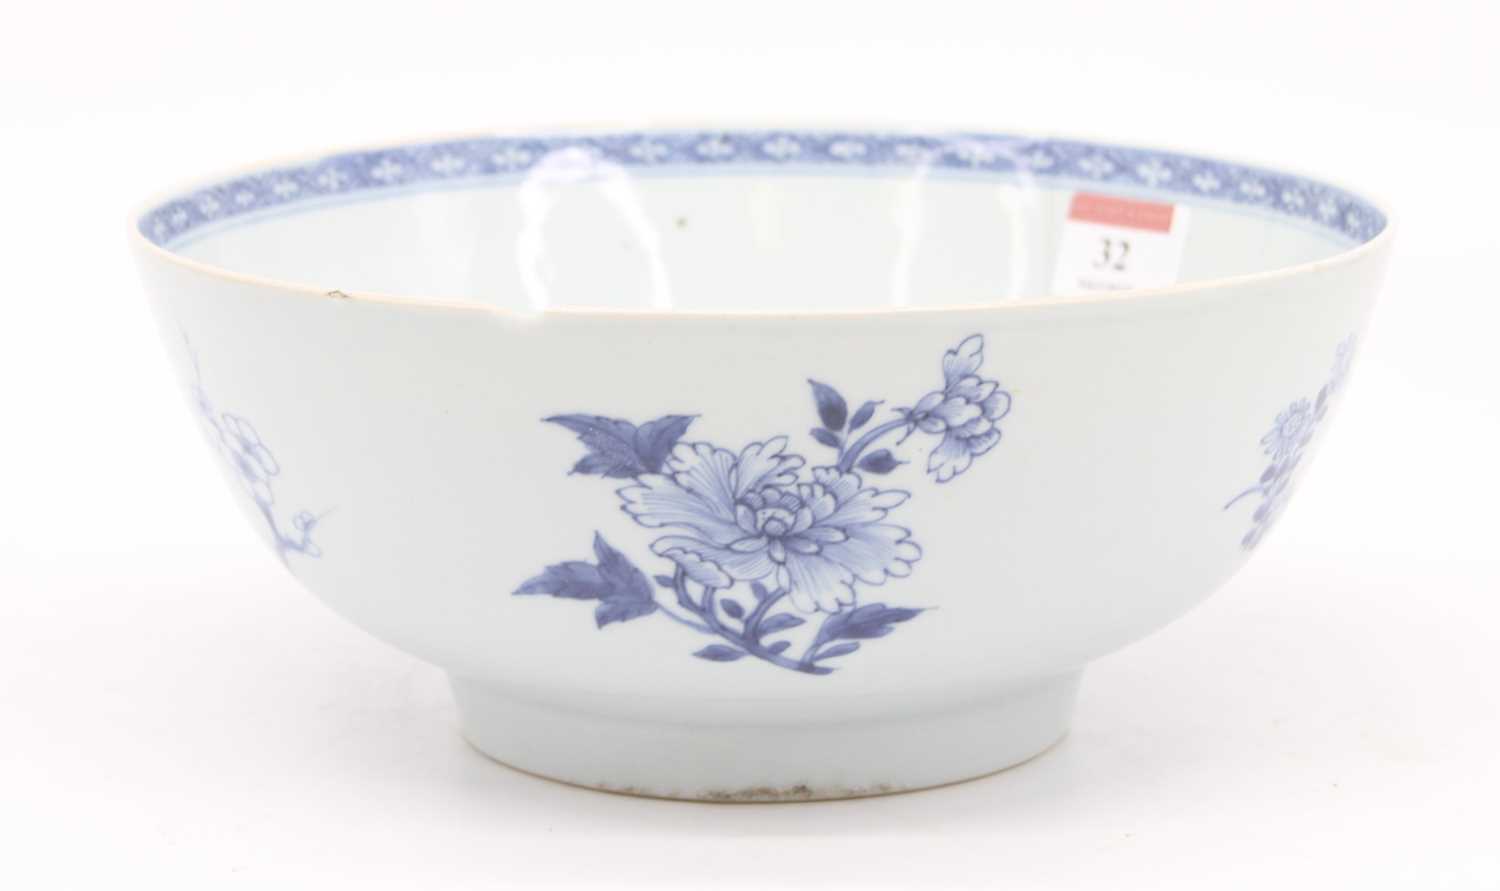 An 18th century Chinese blue and white porcelain bowl, decorated with flowers, dia. 24cm (a/f) - Image 3 of 3